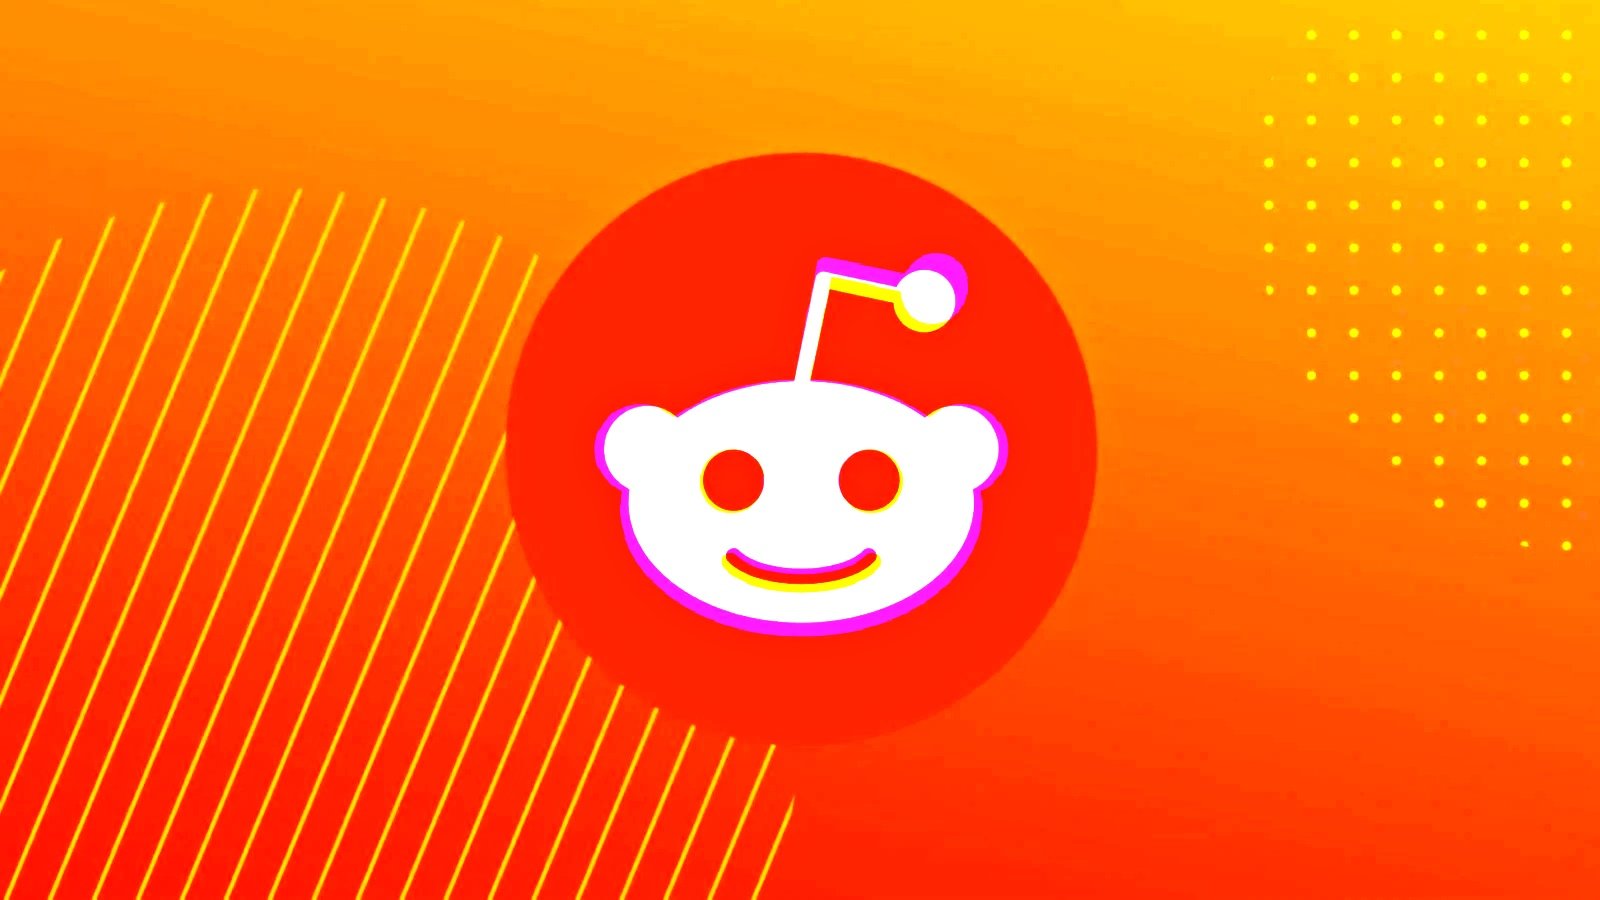 The reddit logo on an orange background showcasing IT Consulting.